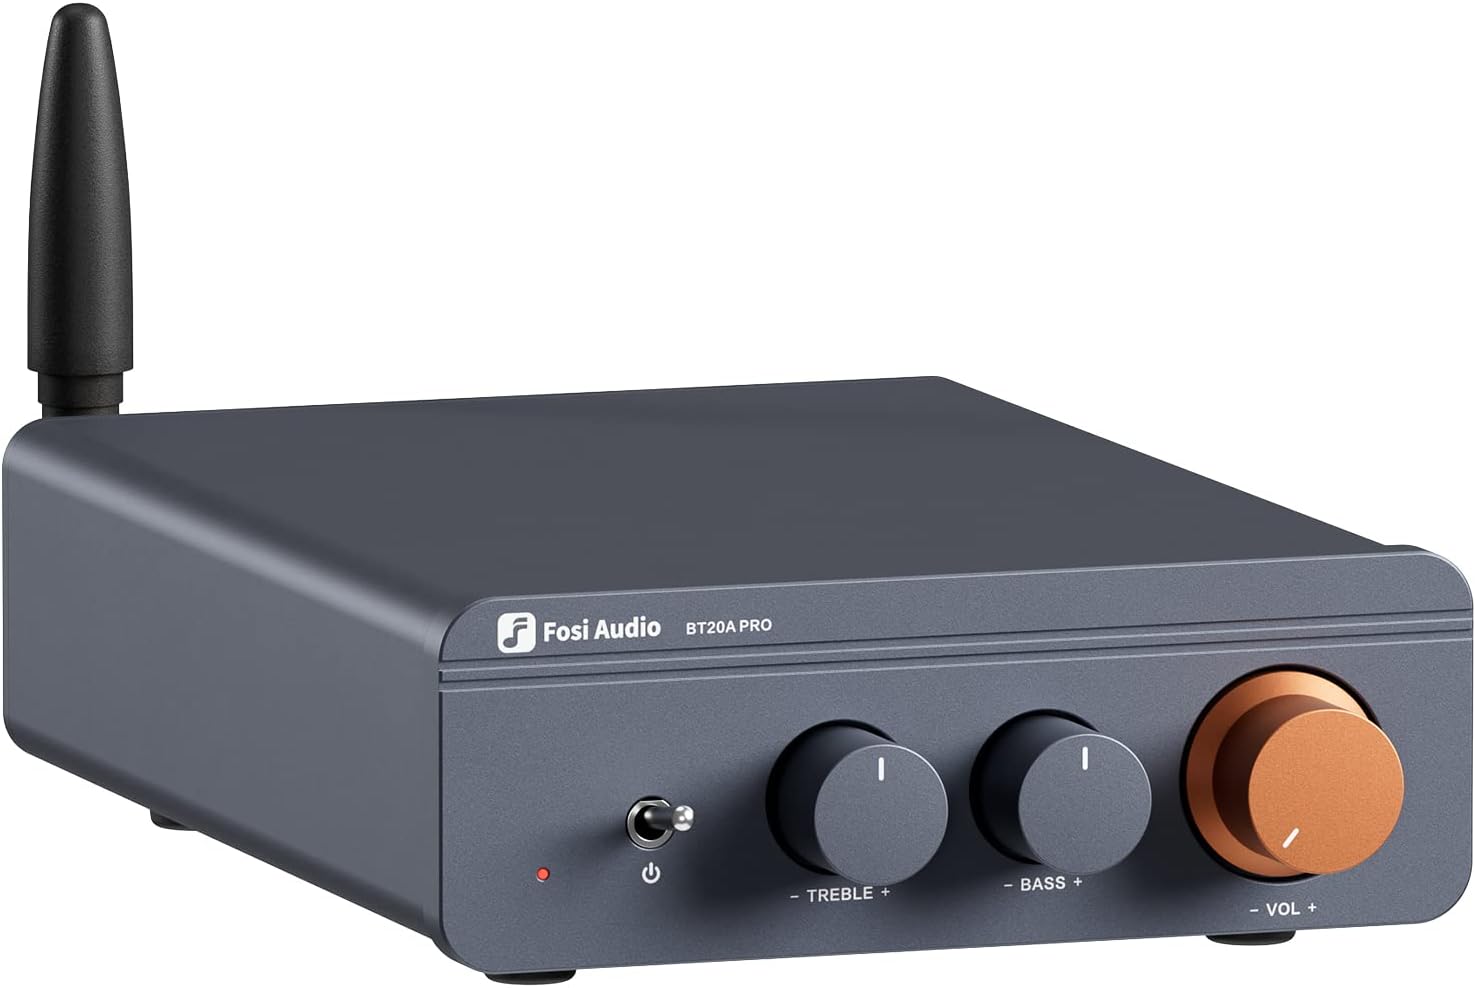 Grab the Fosi Audio BT20A Pro 300W x2 TPA3255 Bluetooth 5.0 Home Audio Stereo 2 Channel Amplifier Receiver Now!